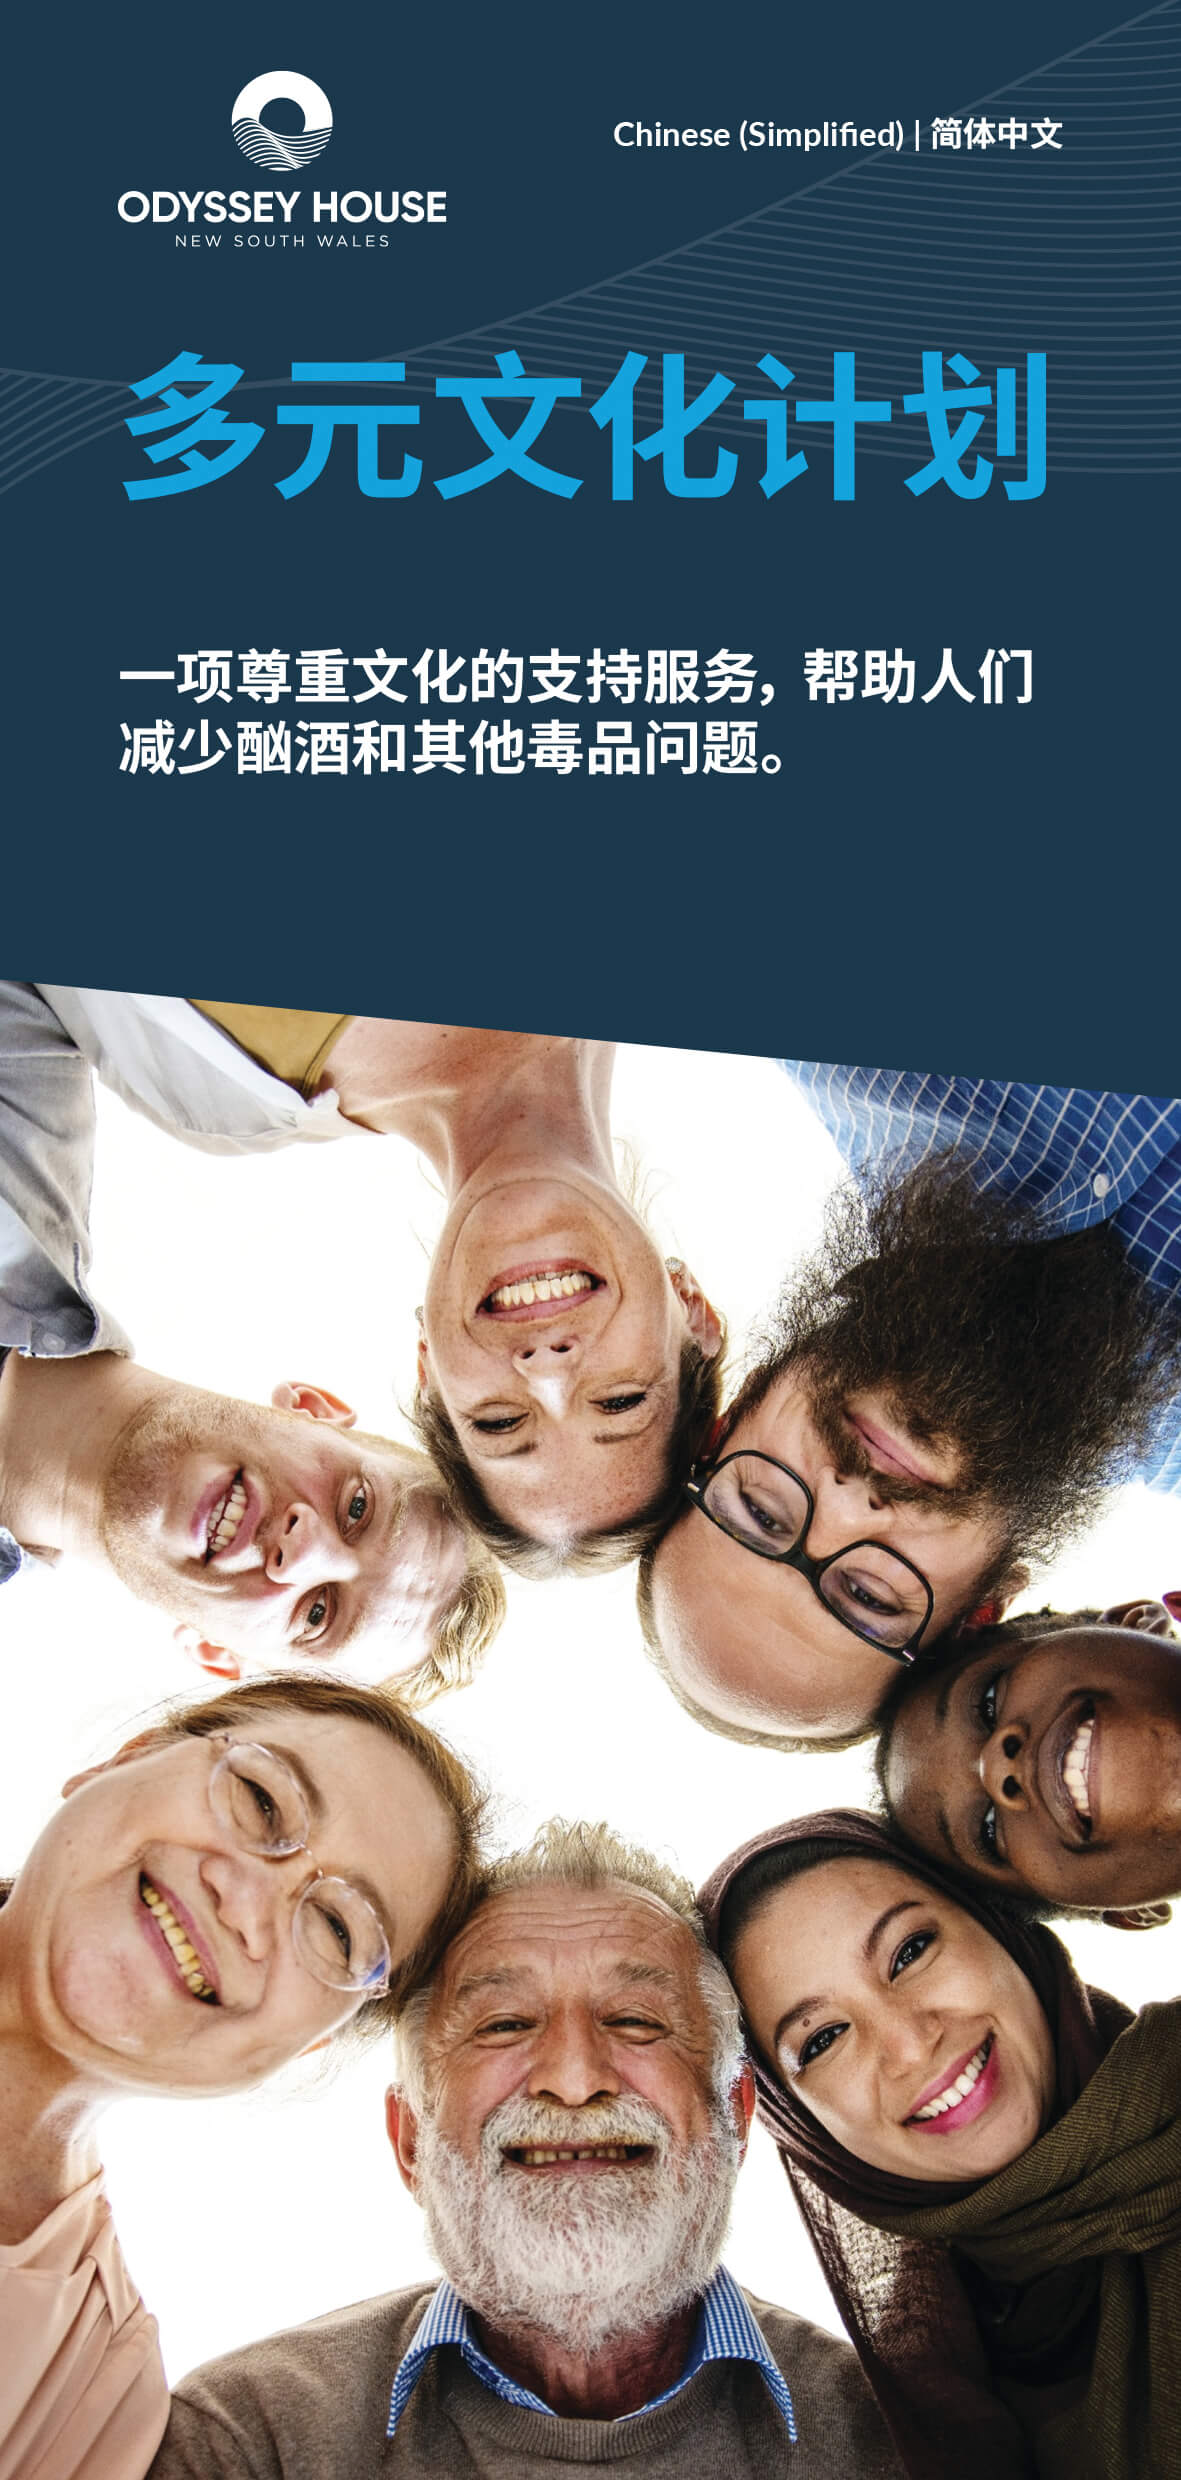 Multicultural-Programs-Brochure-Chinese